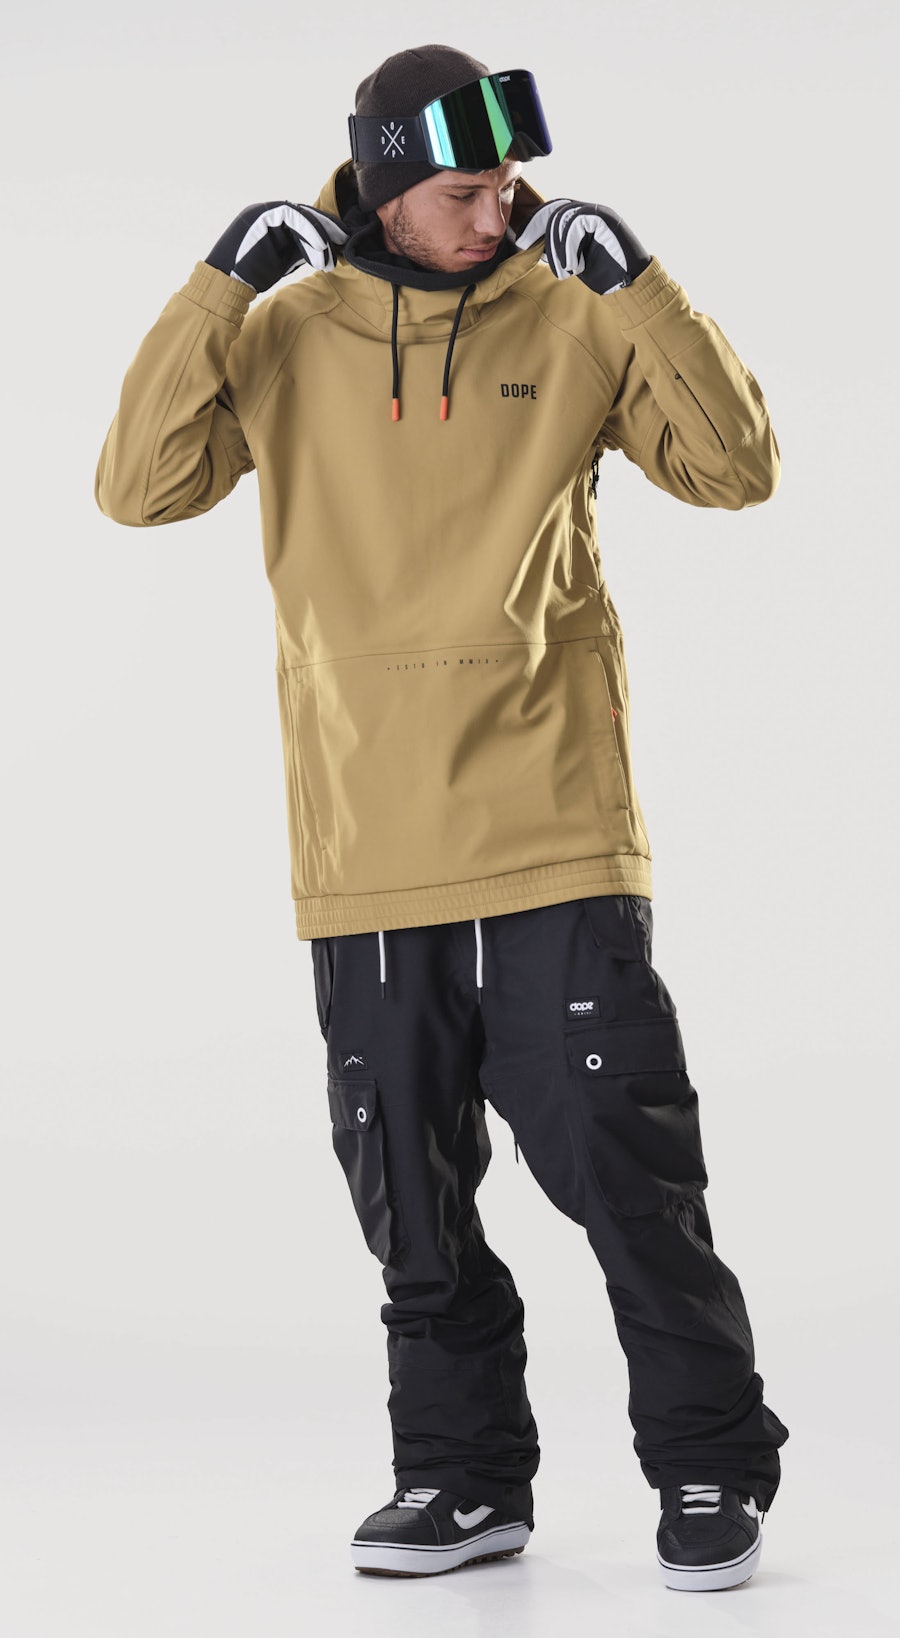 Rogue Gold Snowboard Outfit Men Multi